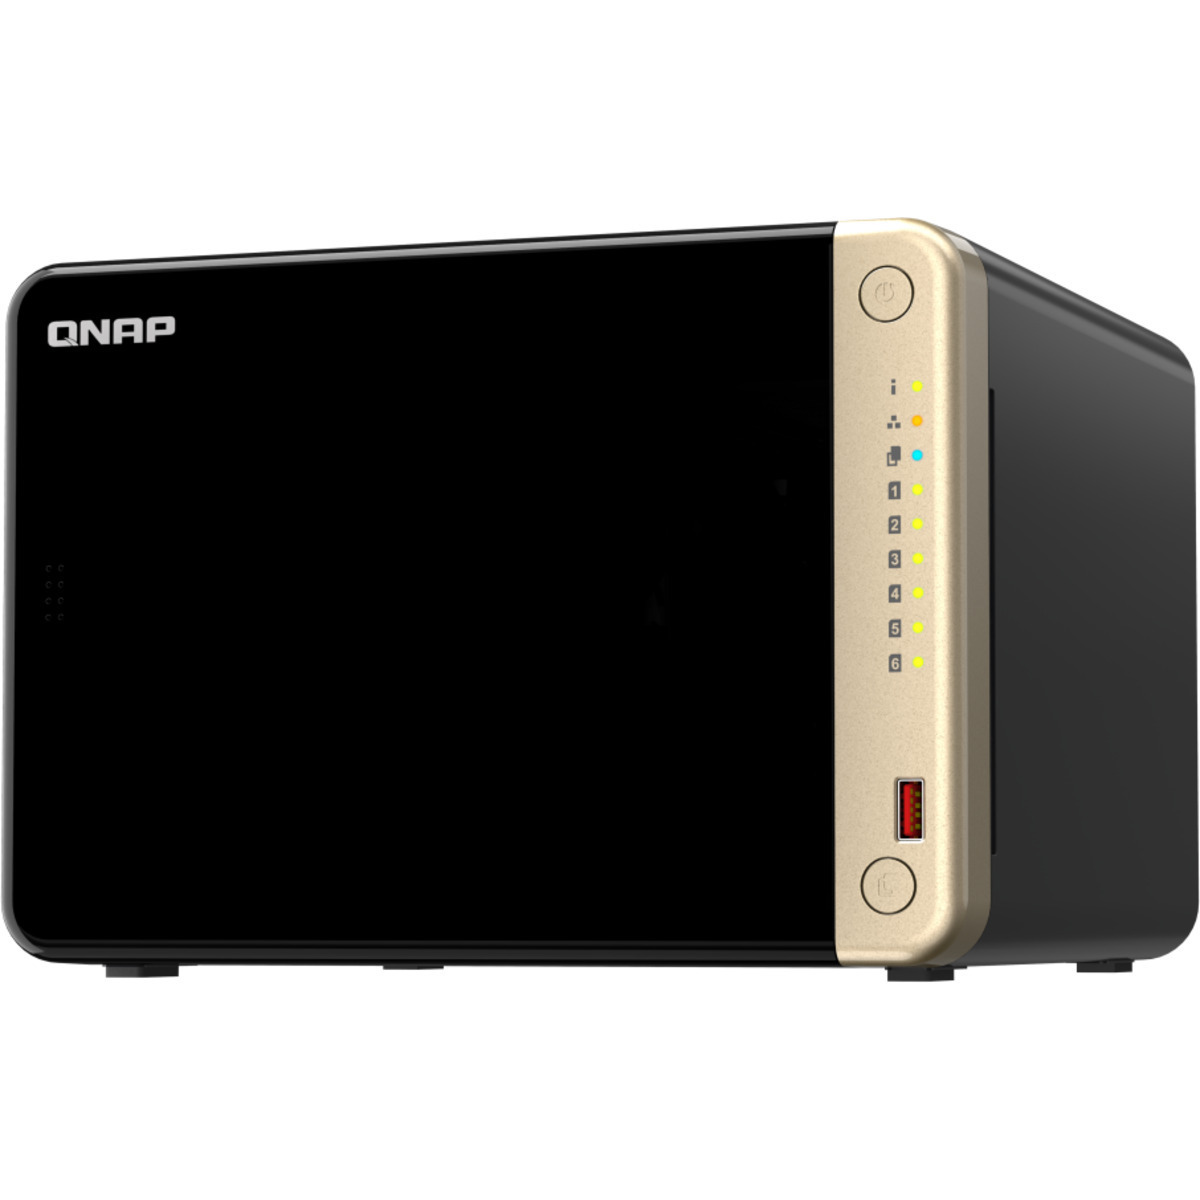 buy $2509 QNAP TS-664 24tb Desktop NAS - Network Attached Storage Device 6x4000gb Samsung 870 EVO MZ-77E4T0BAM 2.5 560/530MB/s SATA 6Gb/s SSD CONSUMER Class Drives Installed - Burn-In Tested - FREE RAM UPGRADE - nas headquarters buy network attached storage server device das new raid-5 free shipping simply usa TS-664